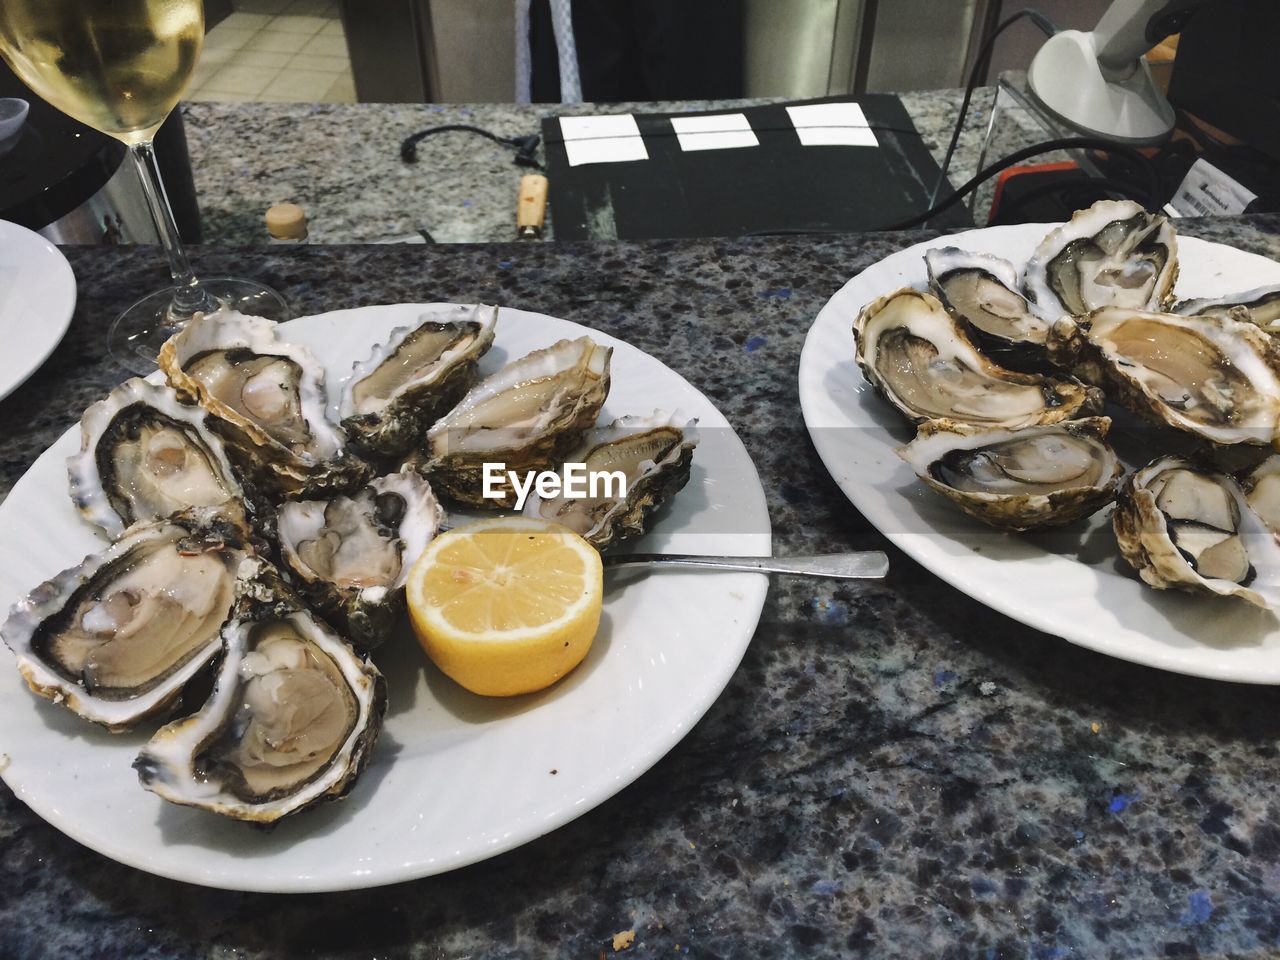 Oysters served in plates